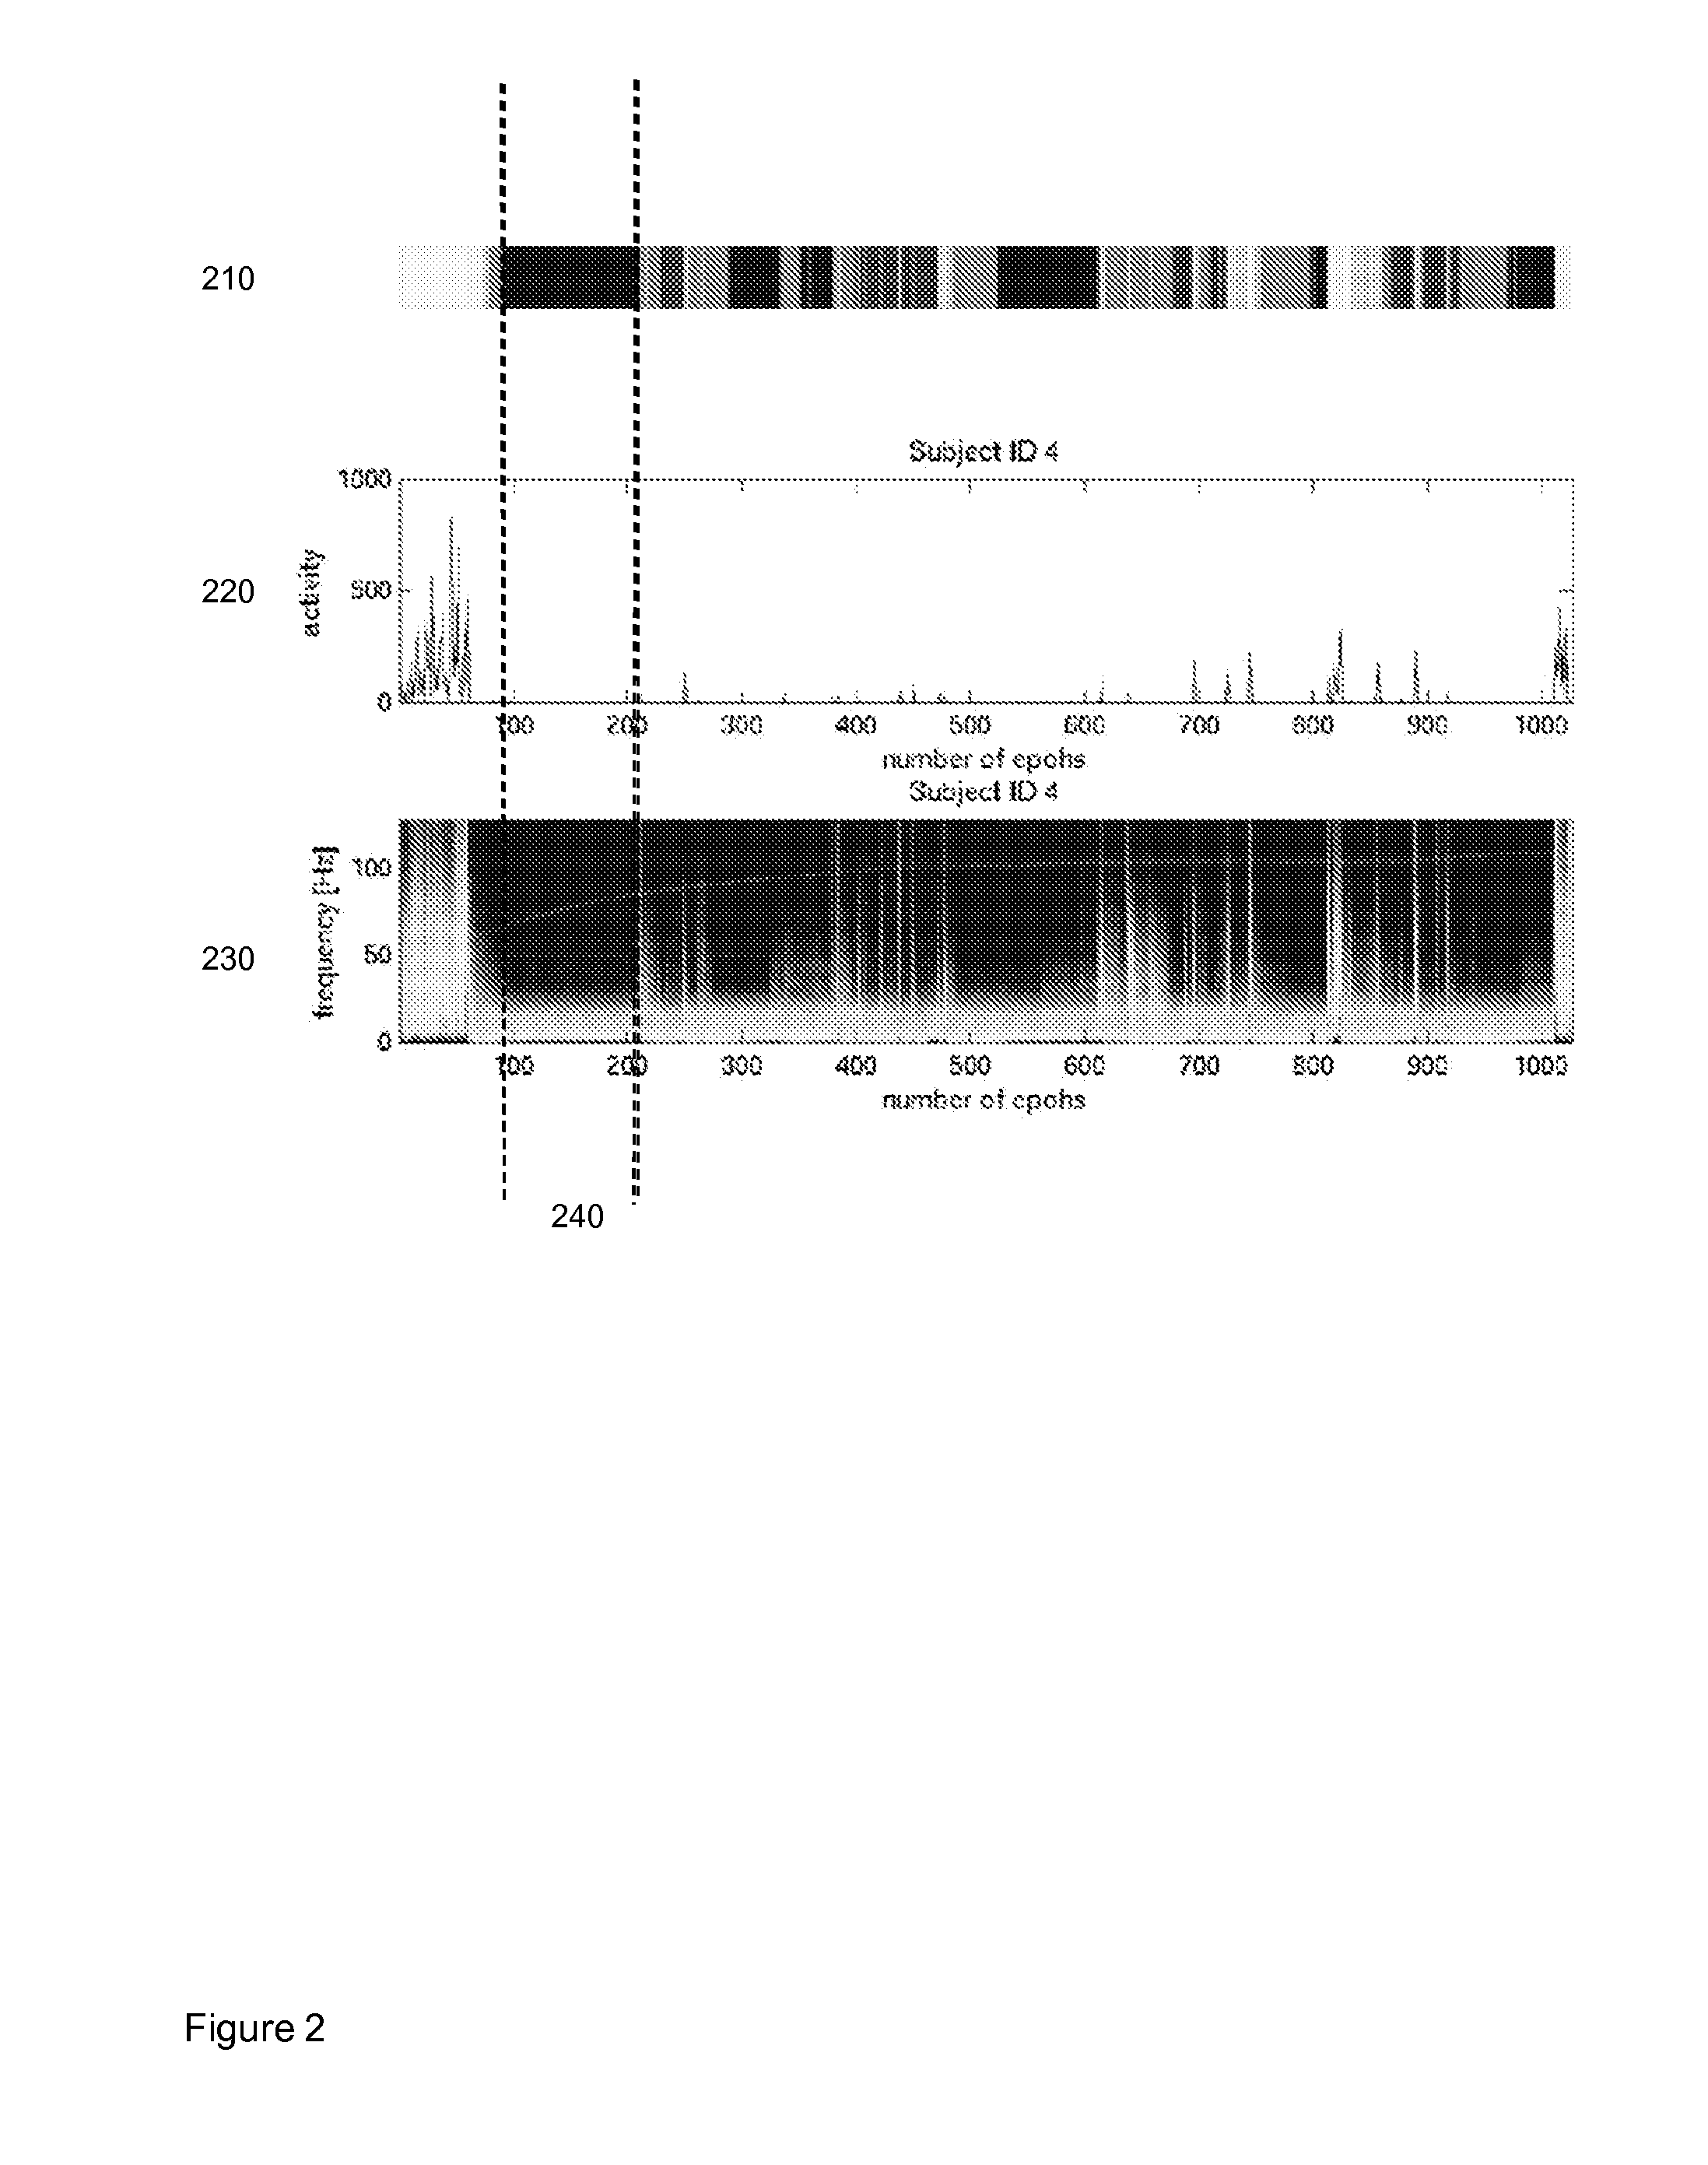 Electronic switch for controlling a device in dependency on a sleep stage